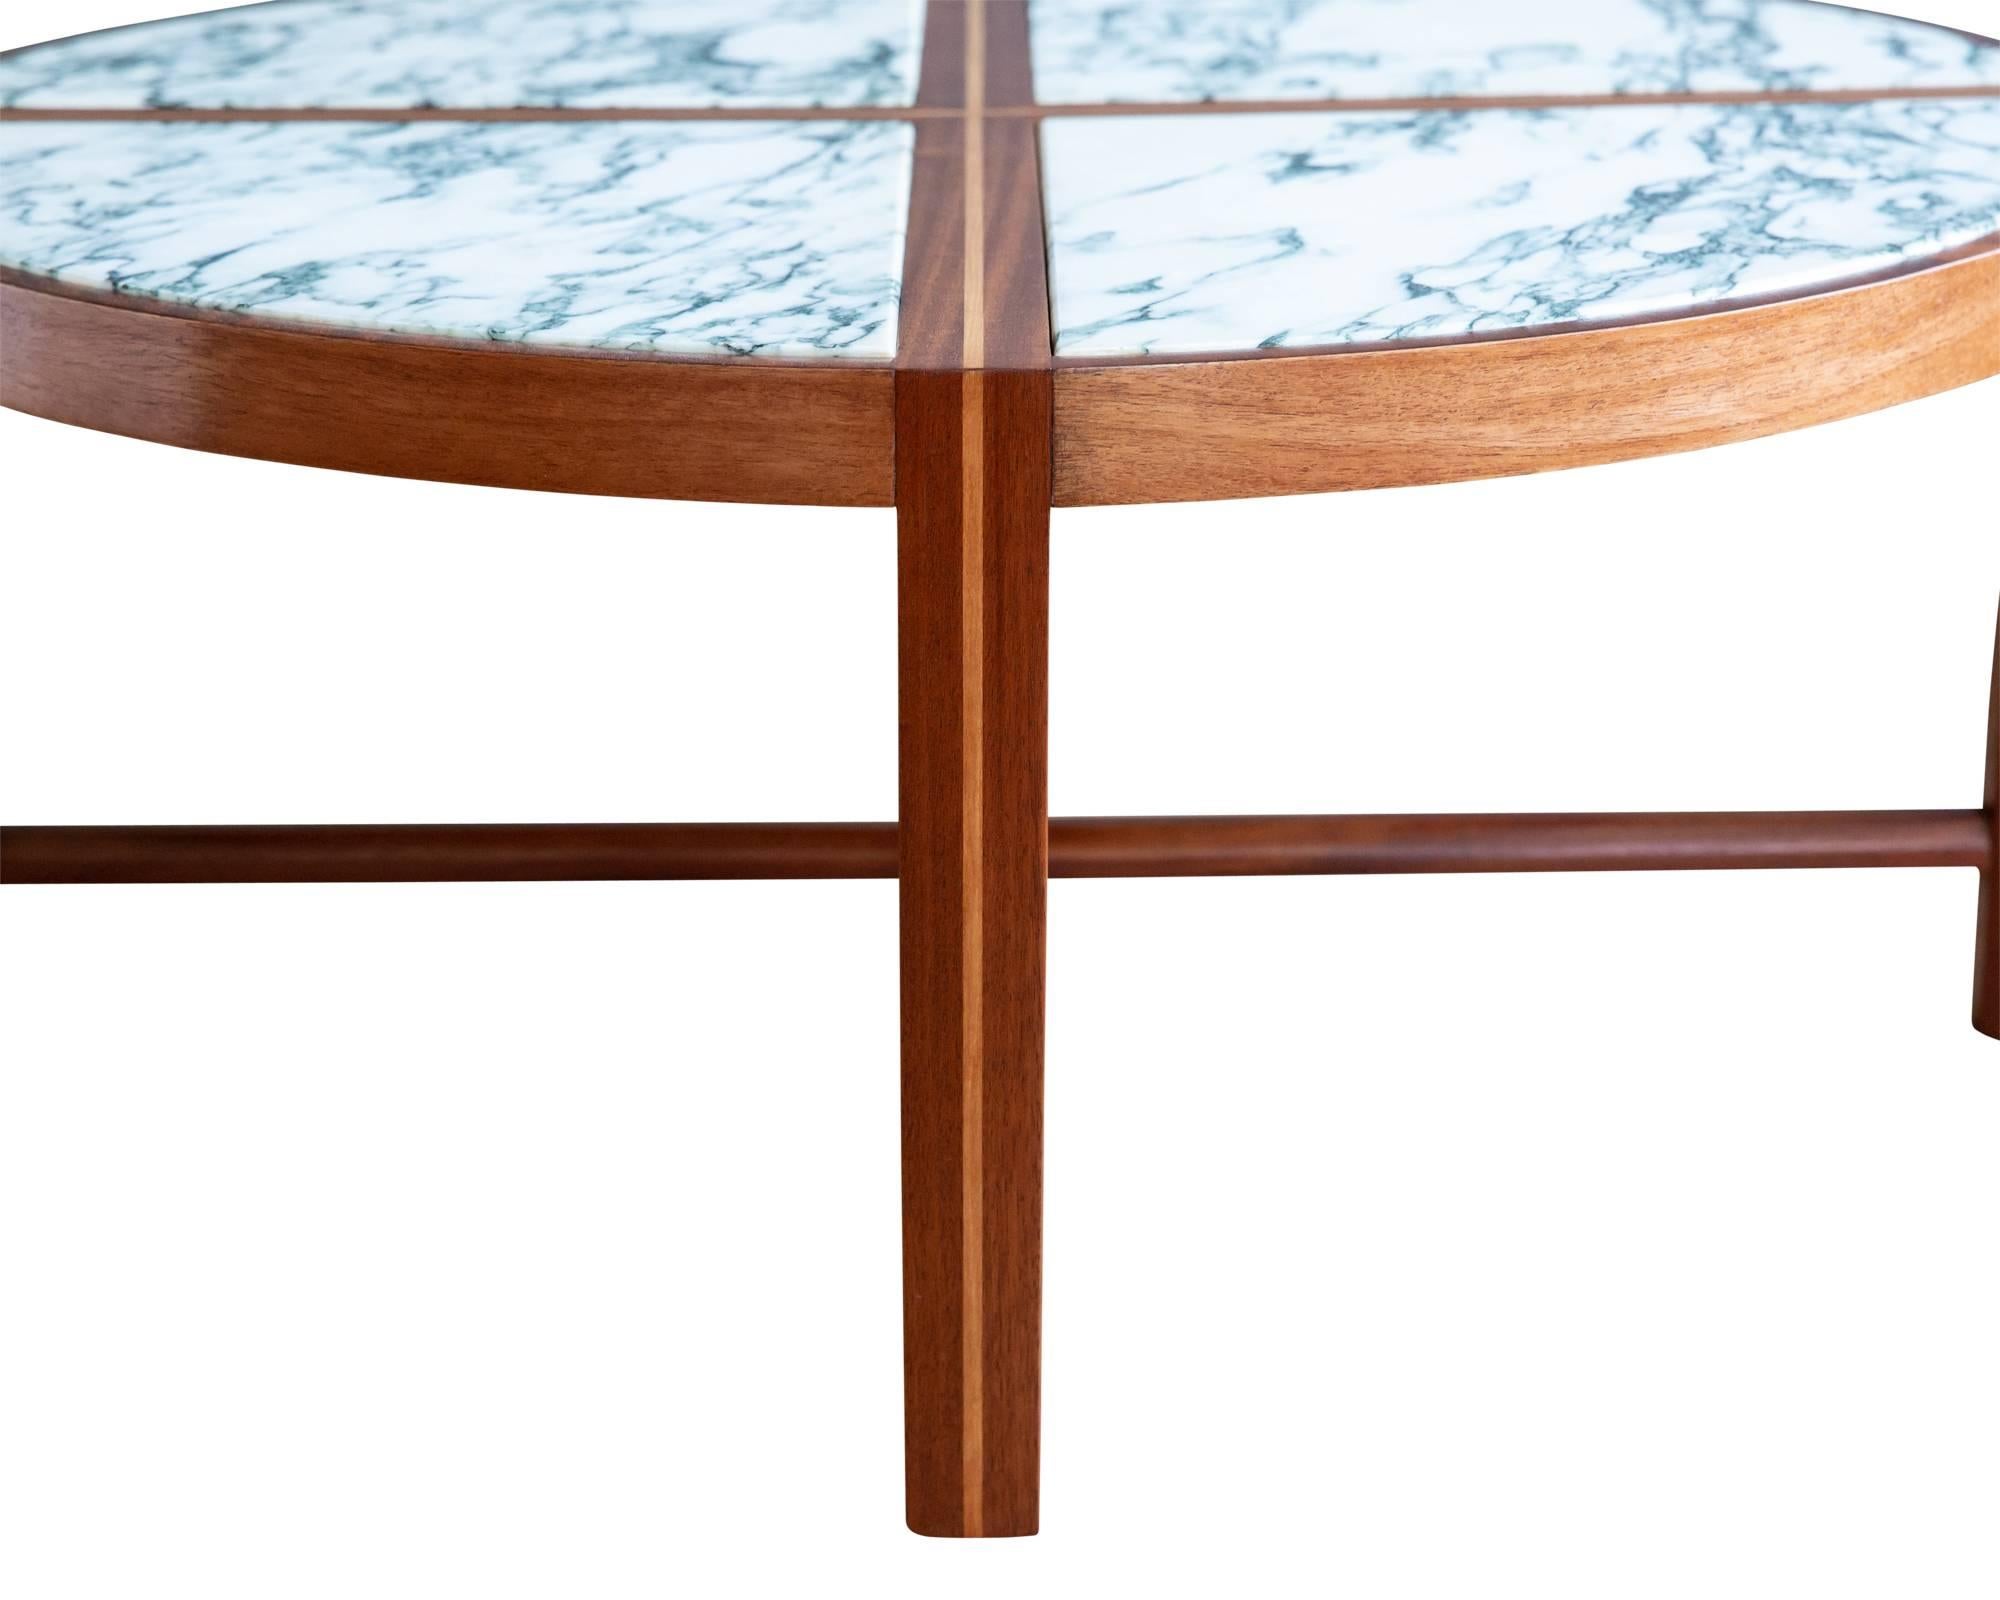 American Round Marble and Mahogany Coffee Table by Tommi Parzinger for Charak Modern